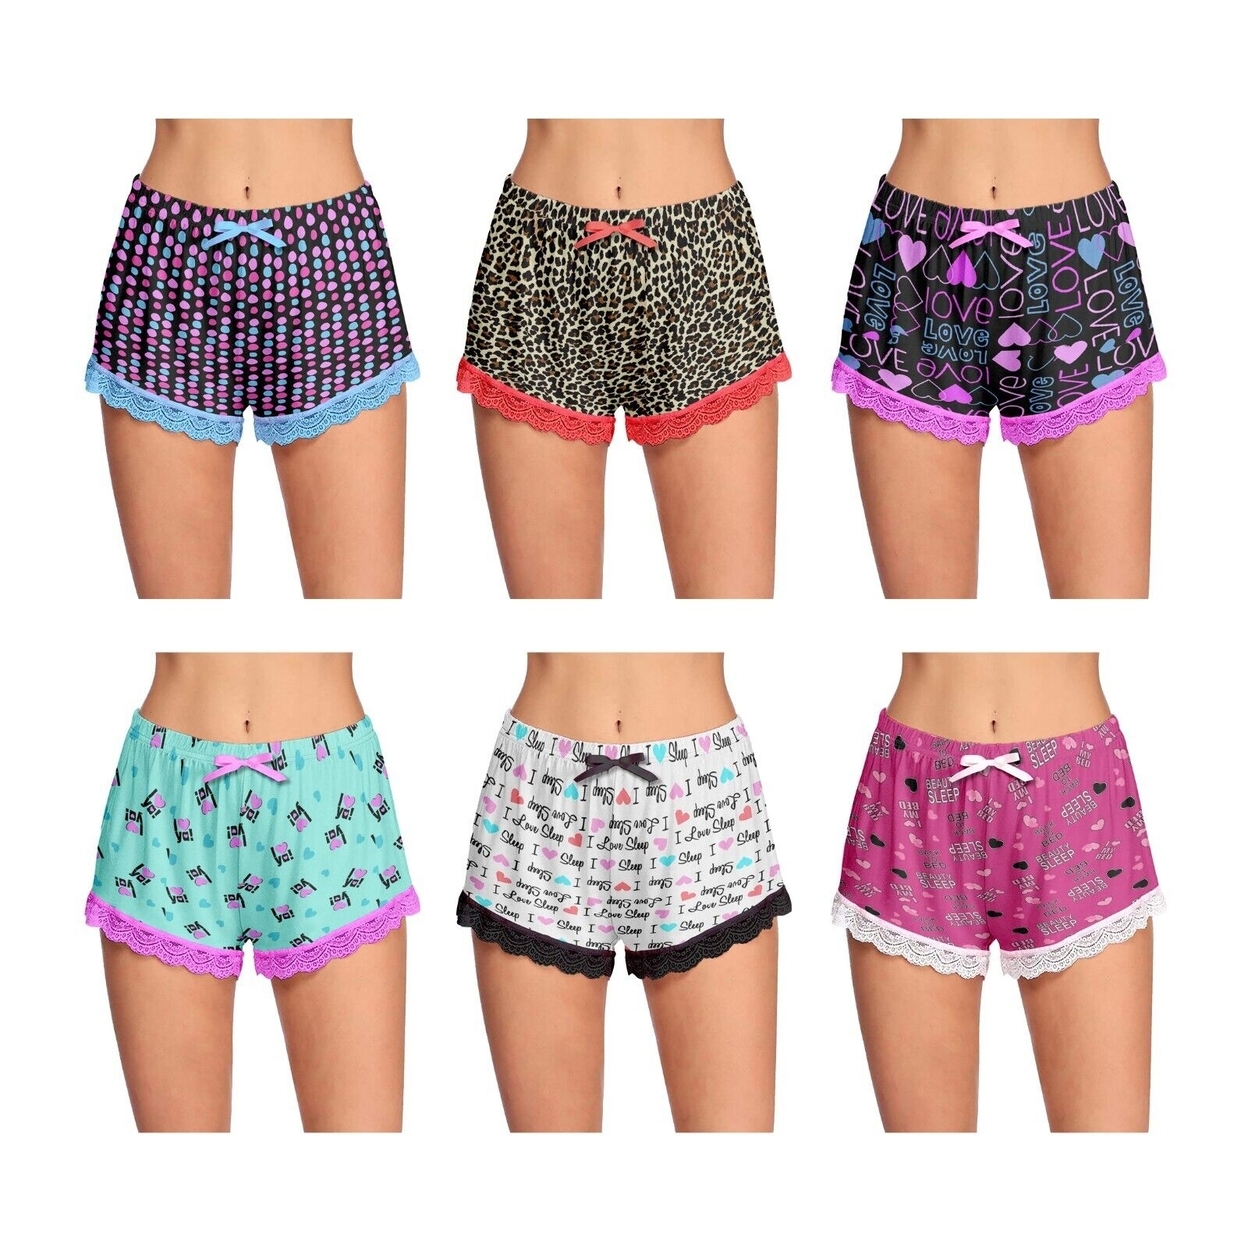 3-Pack: Women's Ultra-Soft Cozy Fun Printed Lace Trim Pajama Lounge Shorts - X-large, Shapes